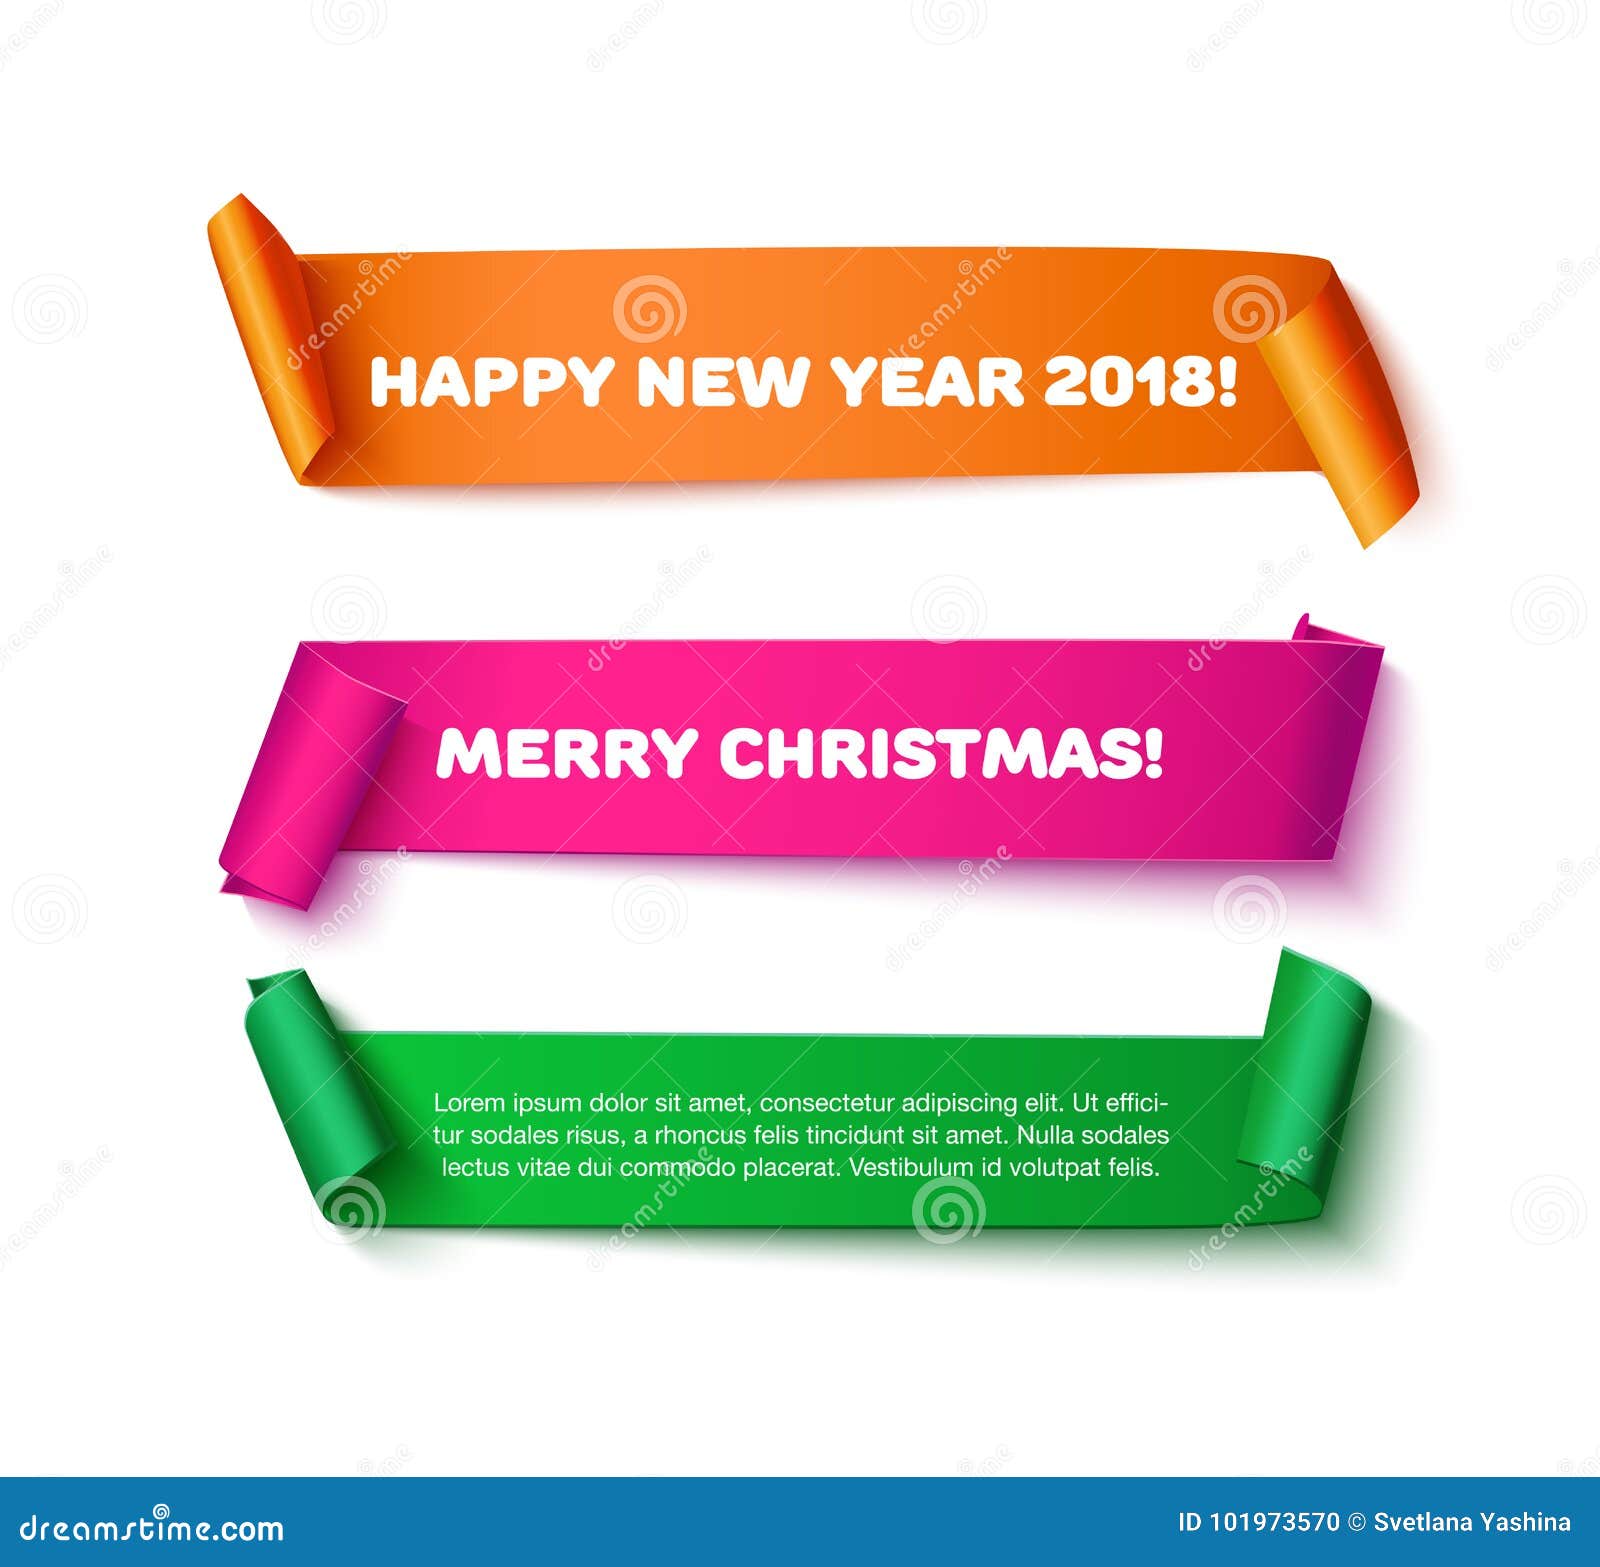 Download Merry Christmas And Happy New Year Greeting Card Banner Stock Vector Illustration of